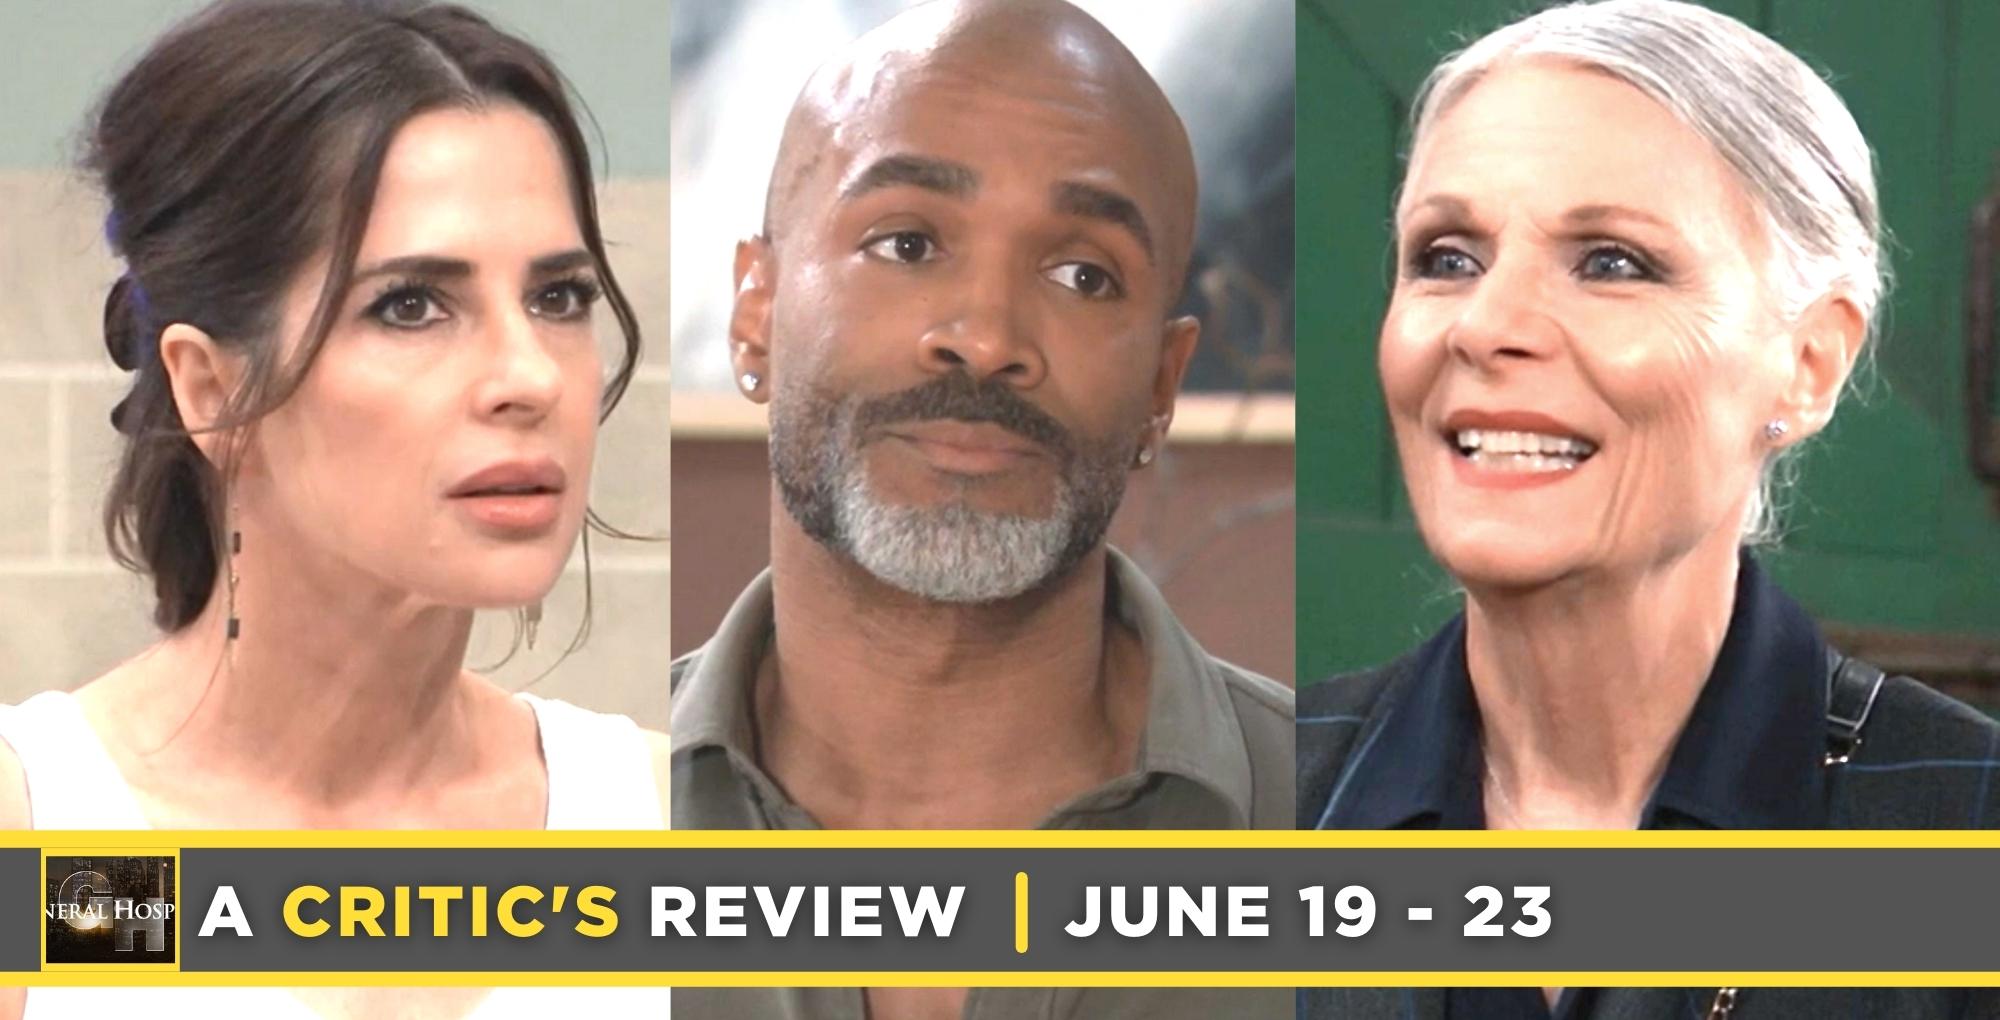 general hospital critic's review for june 19 – june 23, 2023, three images sam, curtis, and tracy.